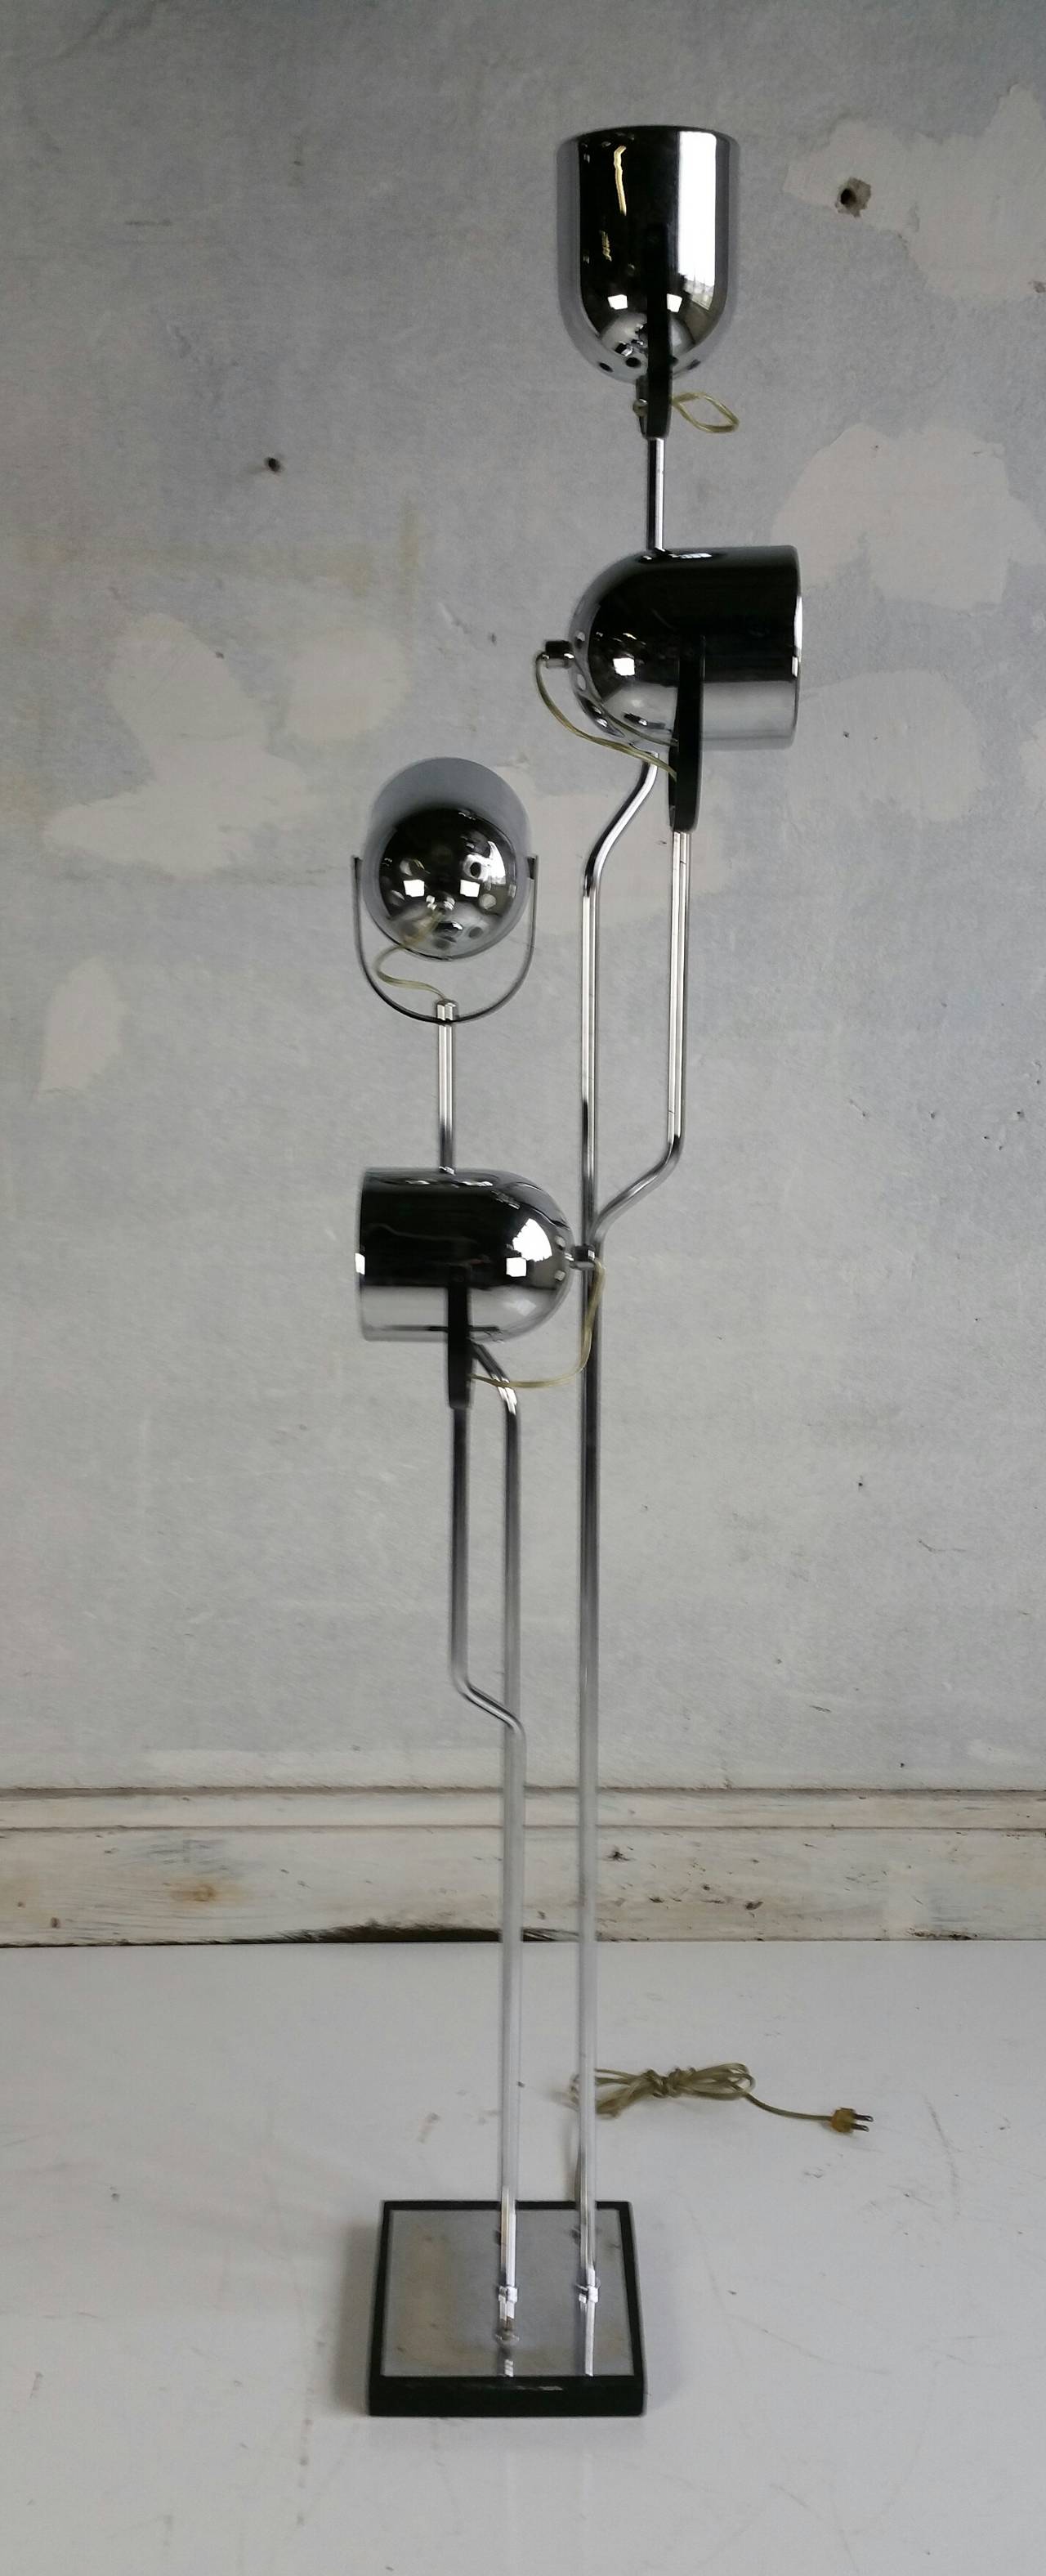 Suggesting a cinema lights set up , a true vintage classic made by Goffredo Reggiani , Italia early 60s .. Shorter stem is 39 inches , longest 65 .

The strirrup have a left and right orotation movement , the chrome ventilated bell up and down .